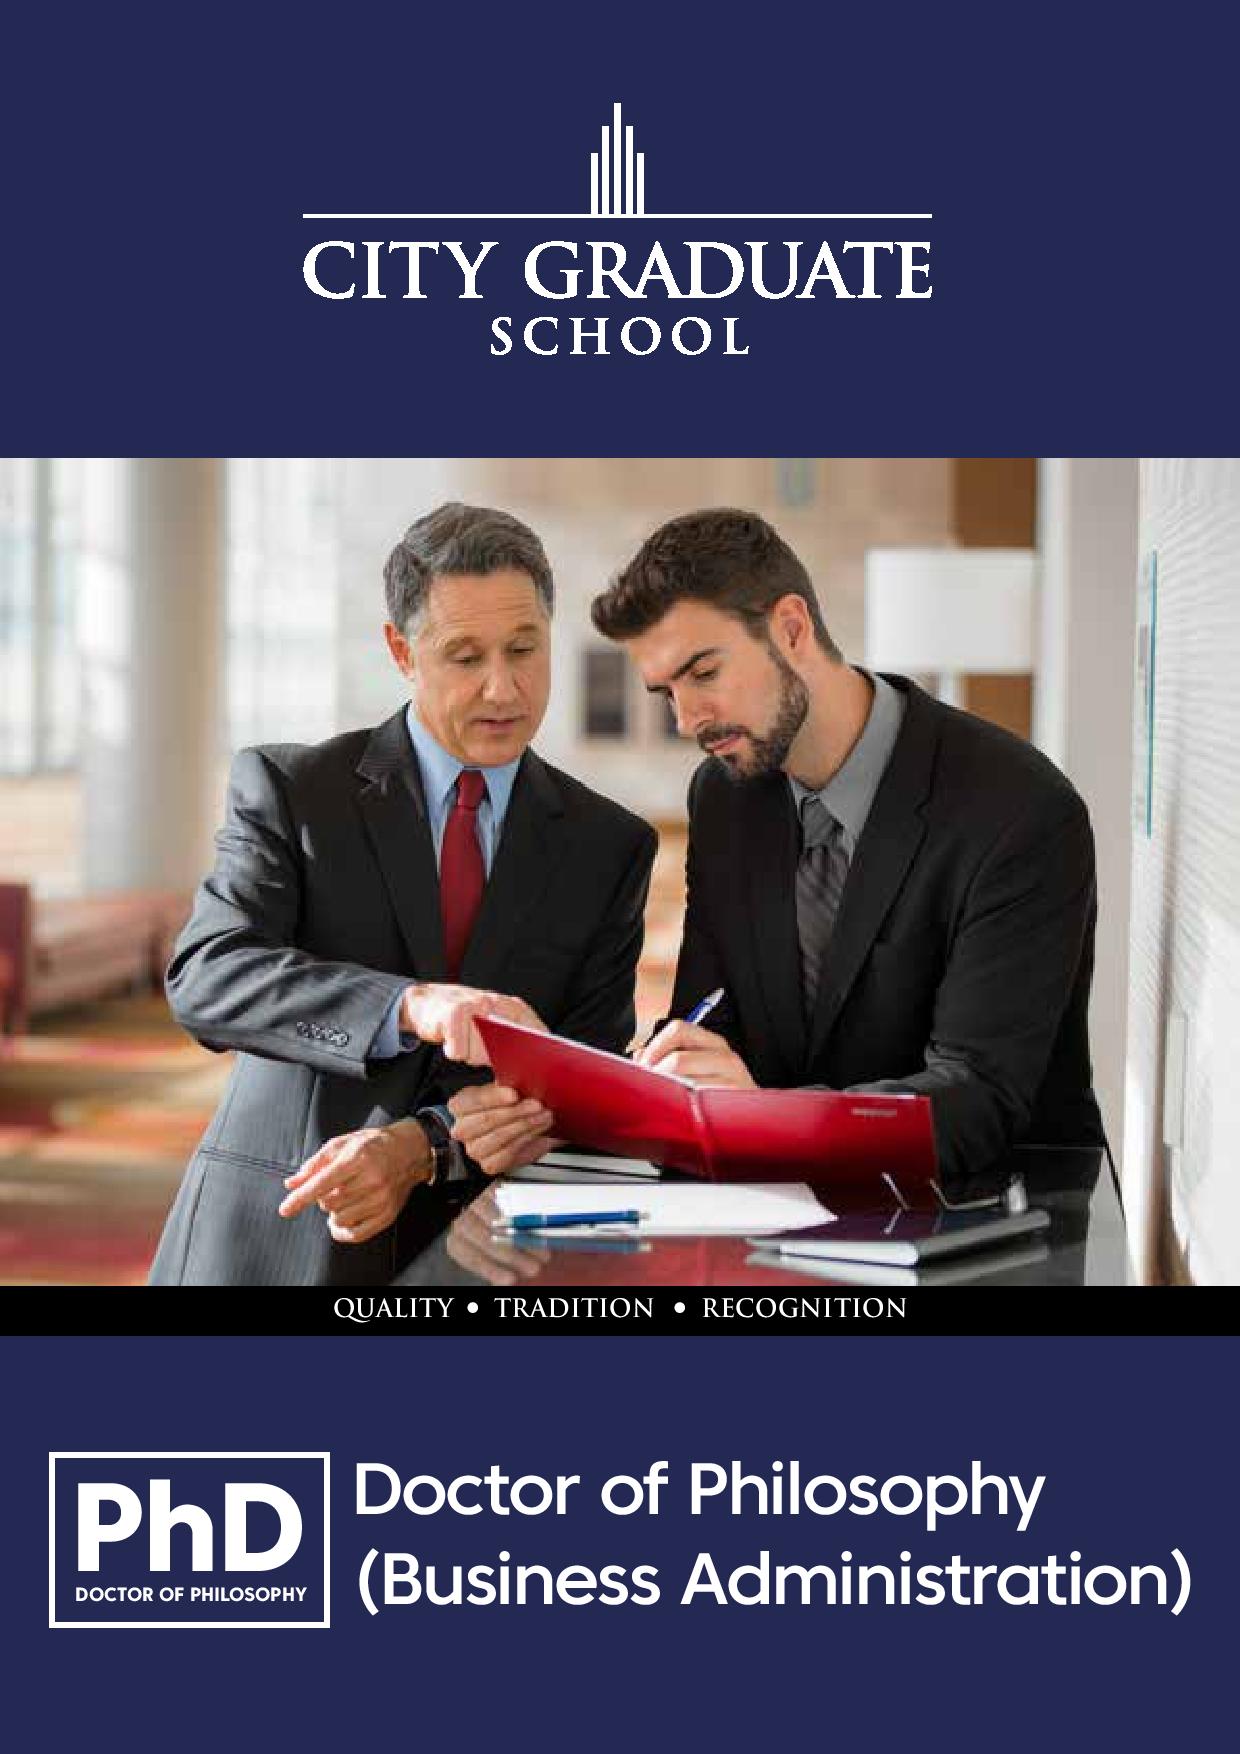 PhD Doc of Philosophy (Business Administration)